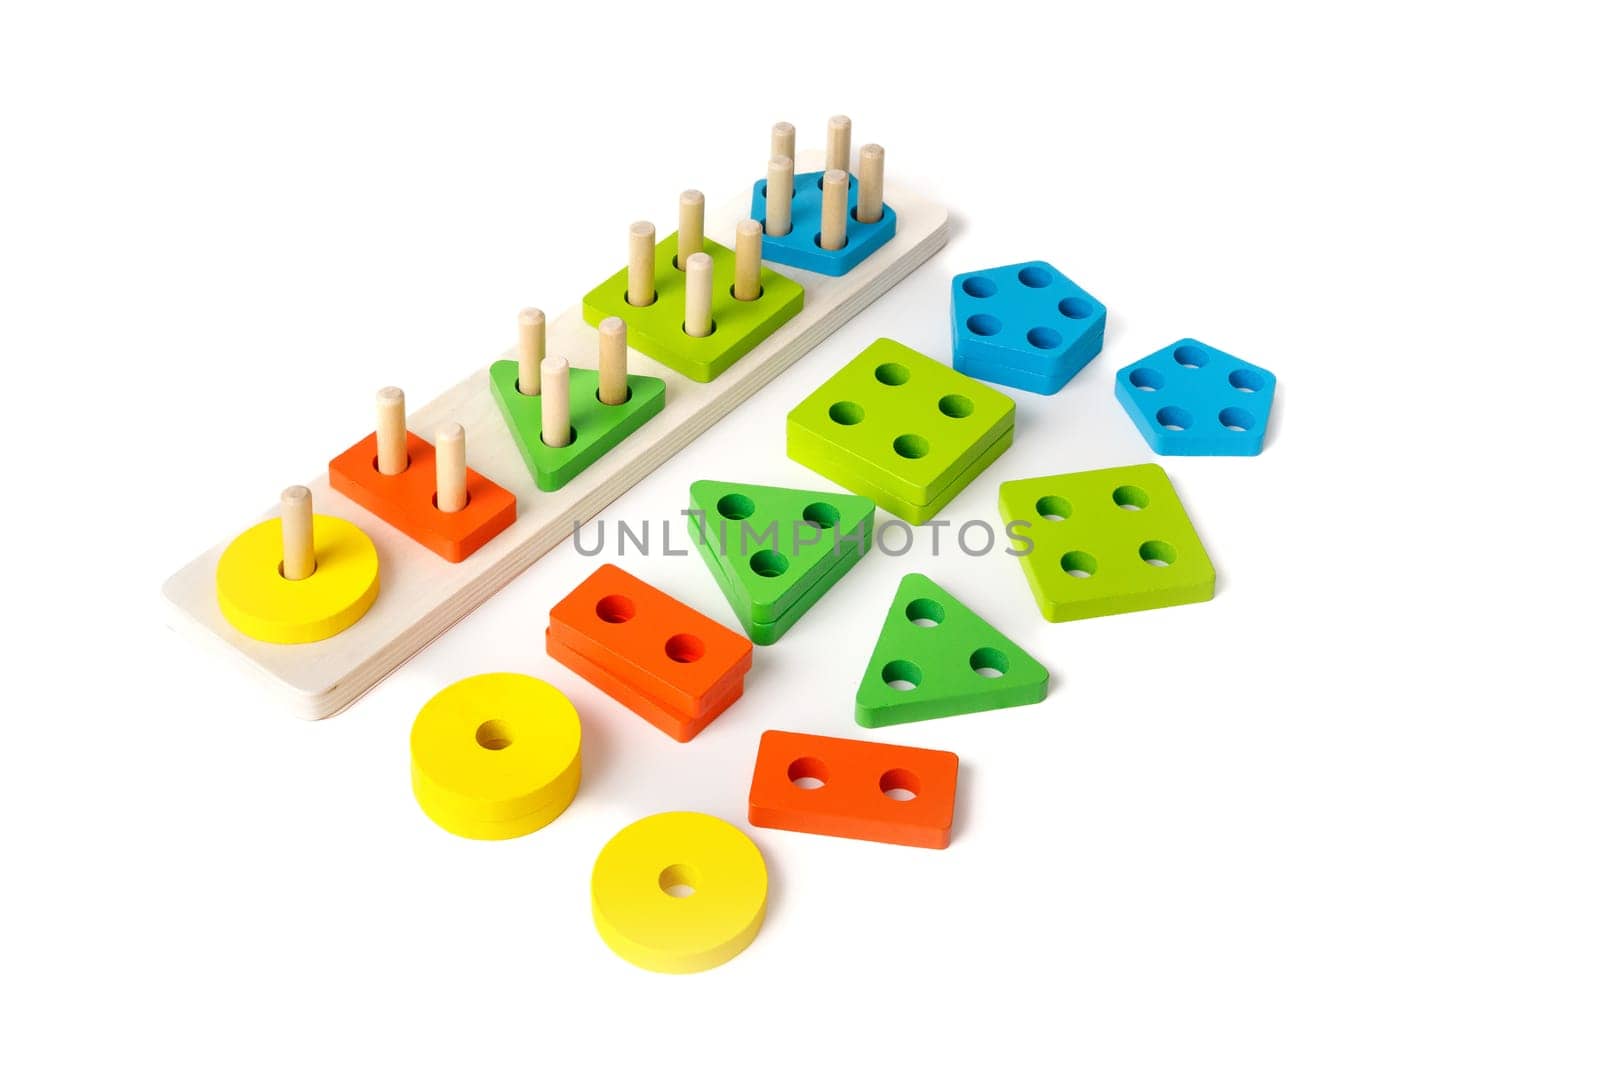 Montessori puzzle toy with colorful blocks of different shapes for children education of primary preschool age, isolated on white background.